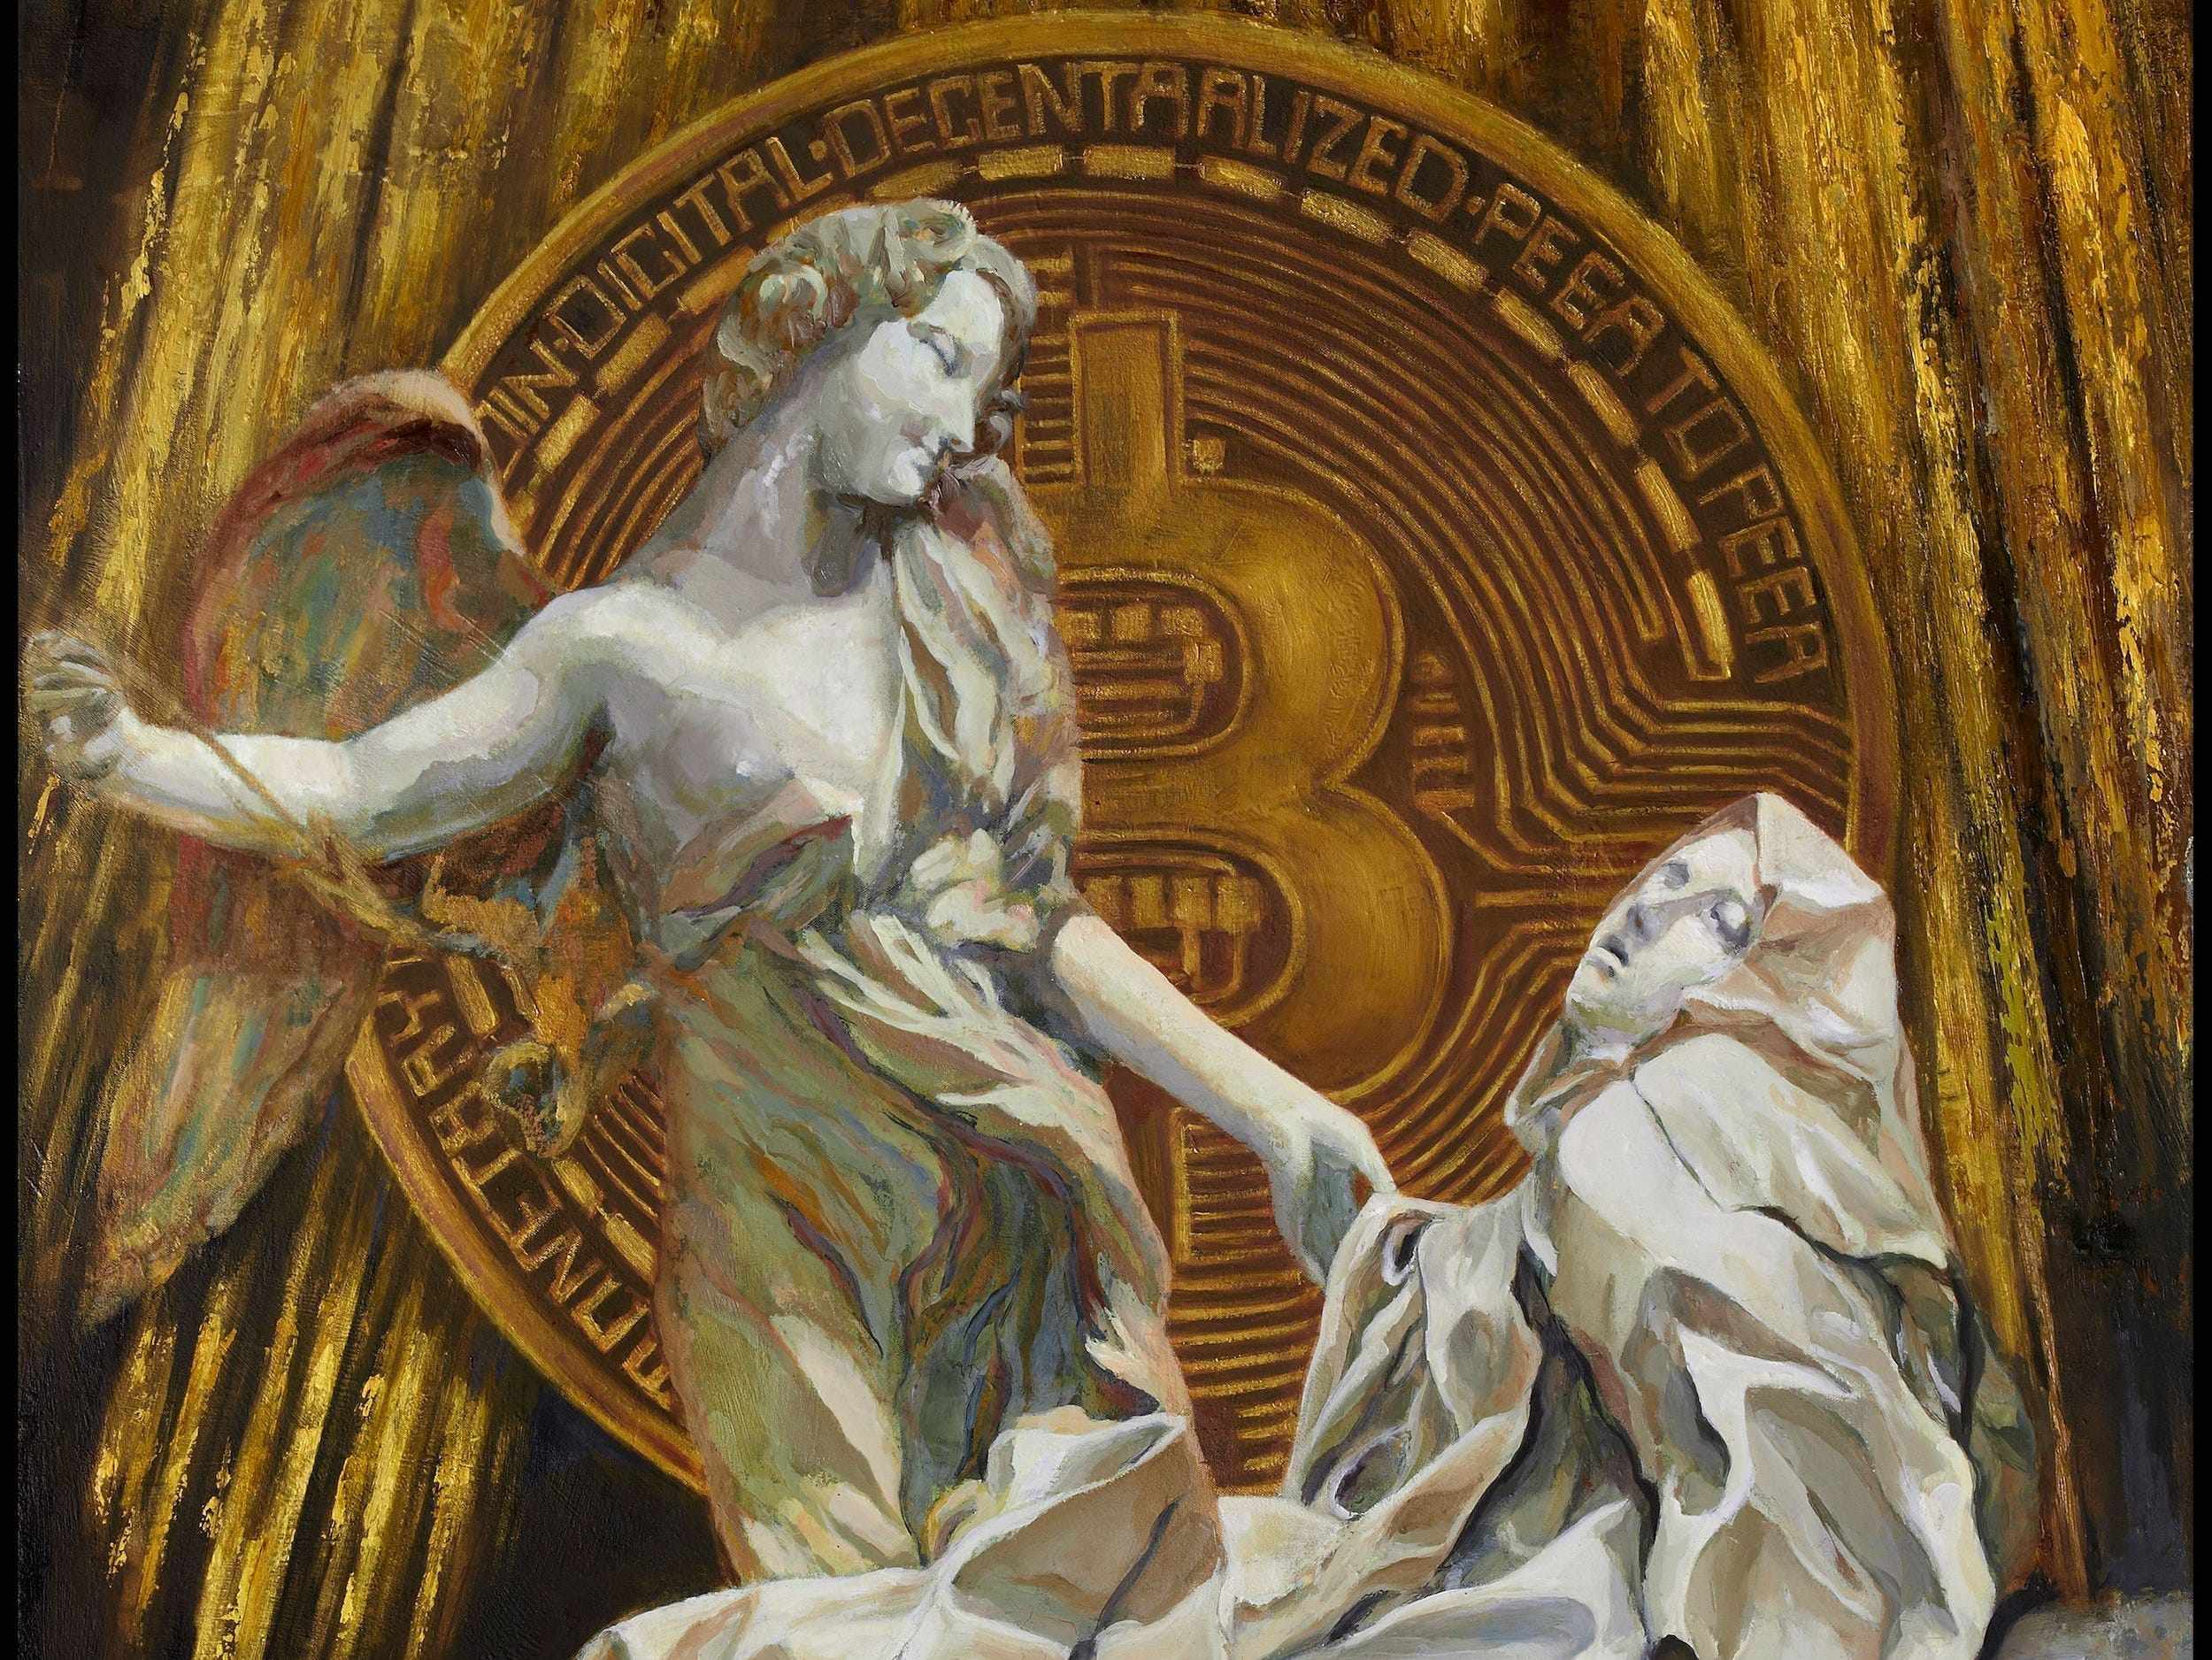 Nft Art / NFT Digital Art That Changes With Bitcoin Price Volatility